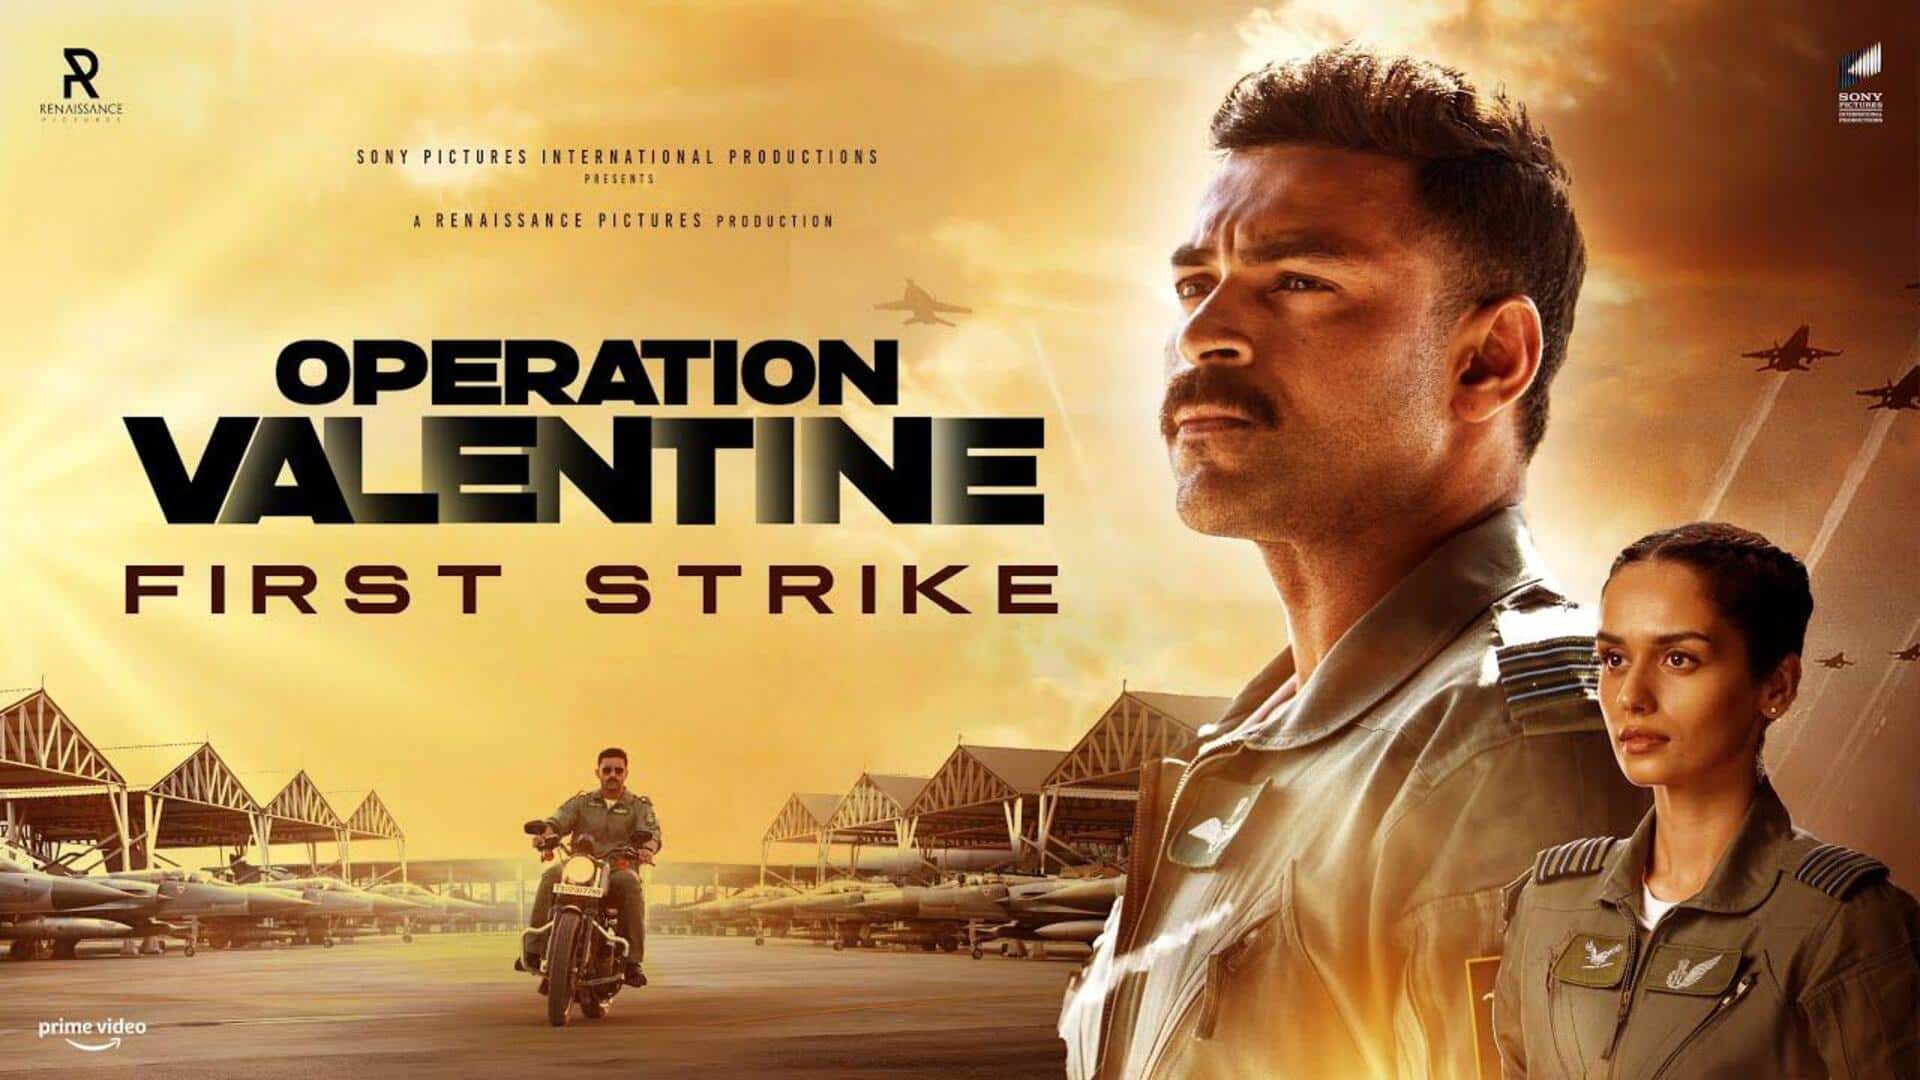 Box office collection: 'Operation Valentine' hoping for boost on weekend